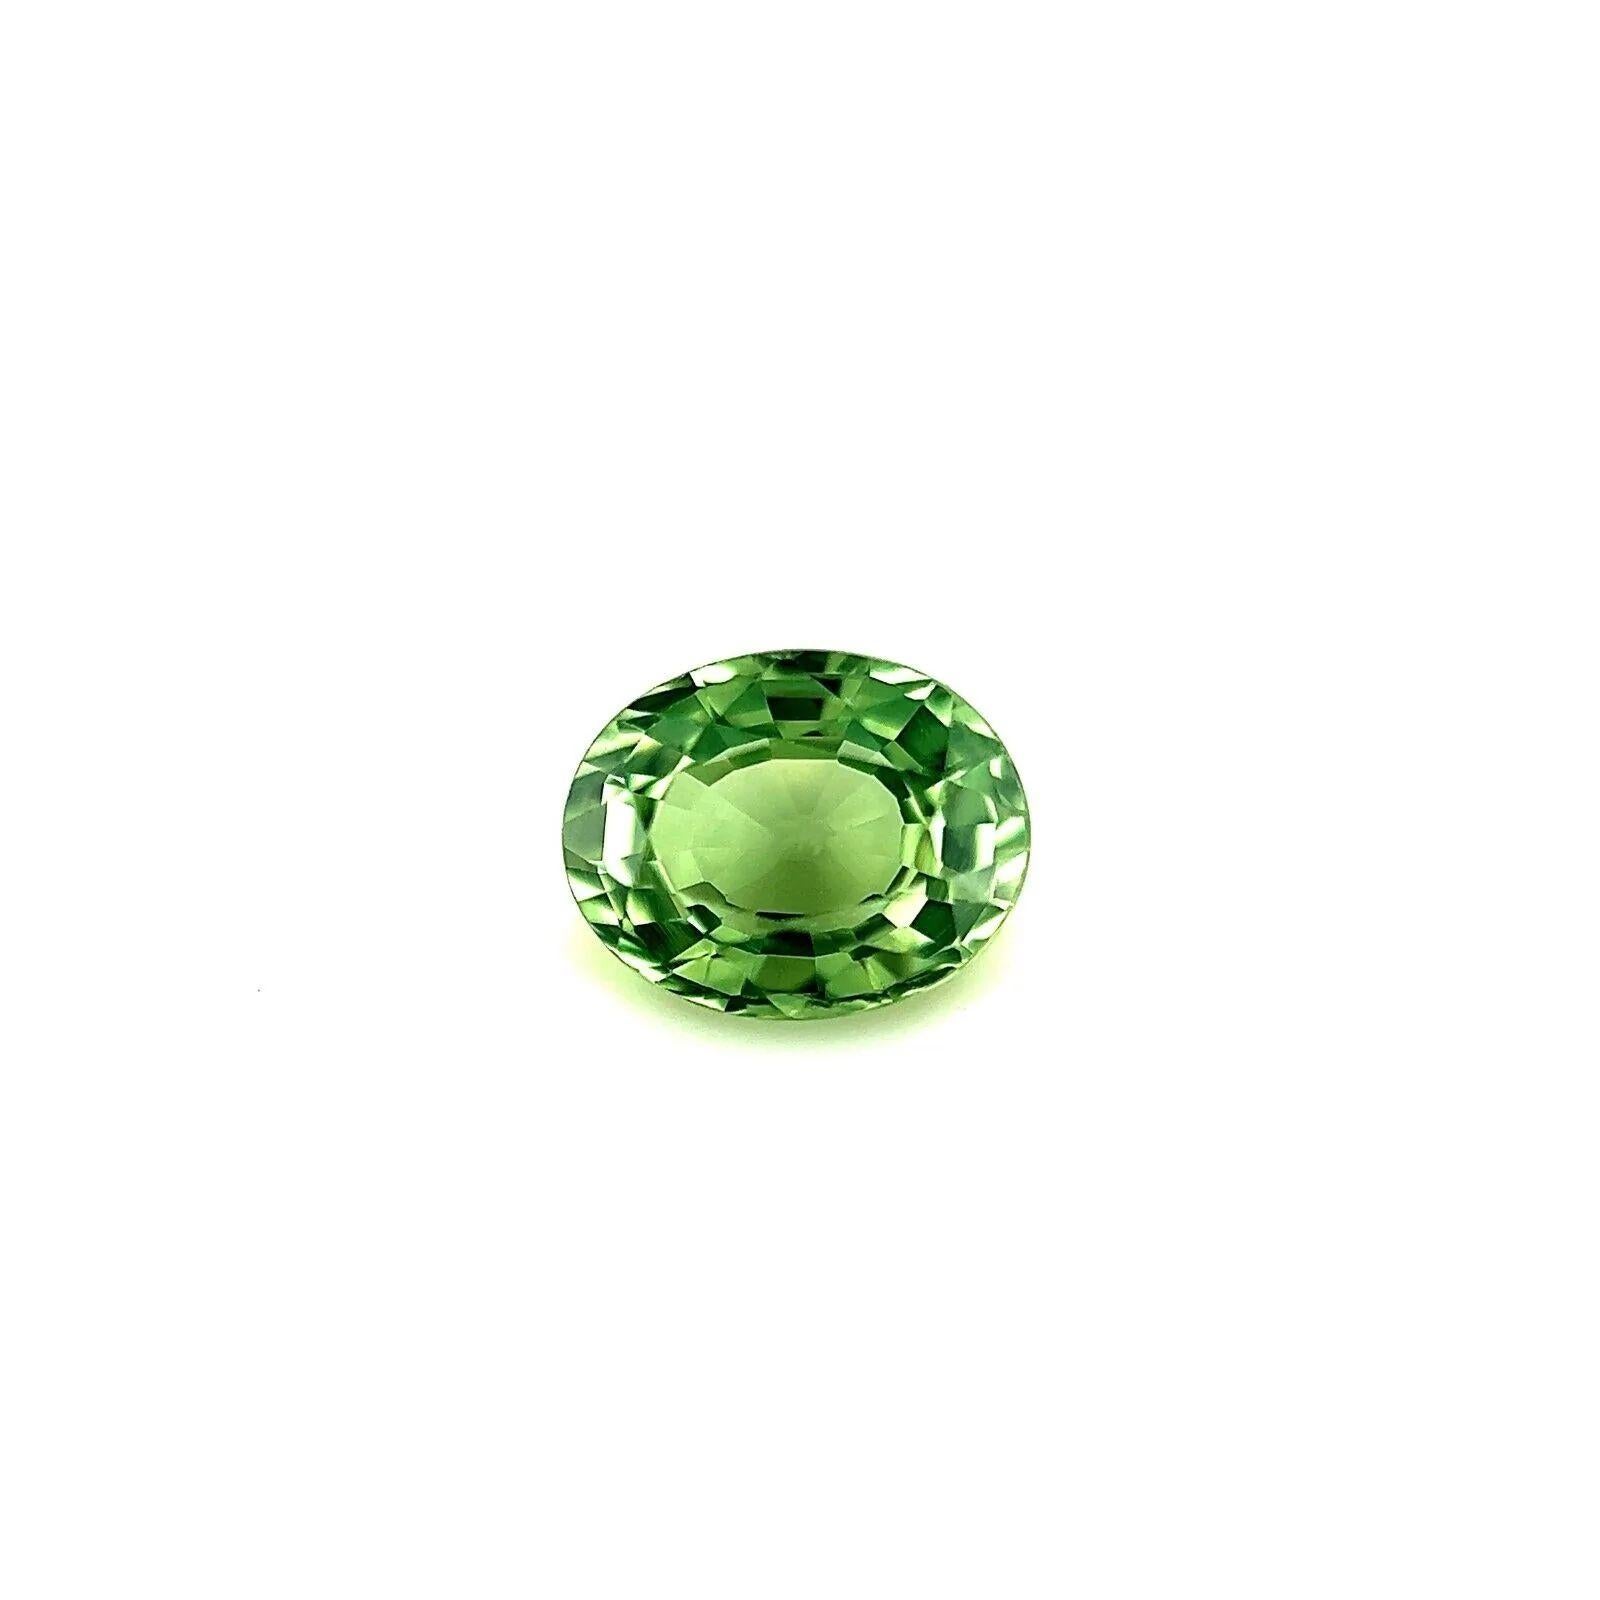 1.02ct Vivid Green Sapphire Natural Oval Cut Loose Cut Gemstone 6.5x5mm VS

Natural Oval Cut Green Australian Sapphire Gemstone.
1.02 Carat with a beautiful vivid green colour and very good clarity, a very clean stone with only some small natural